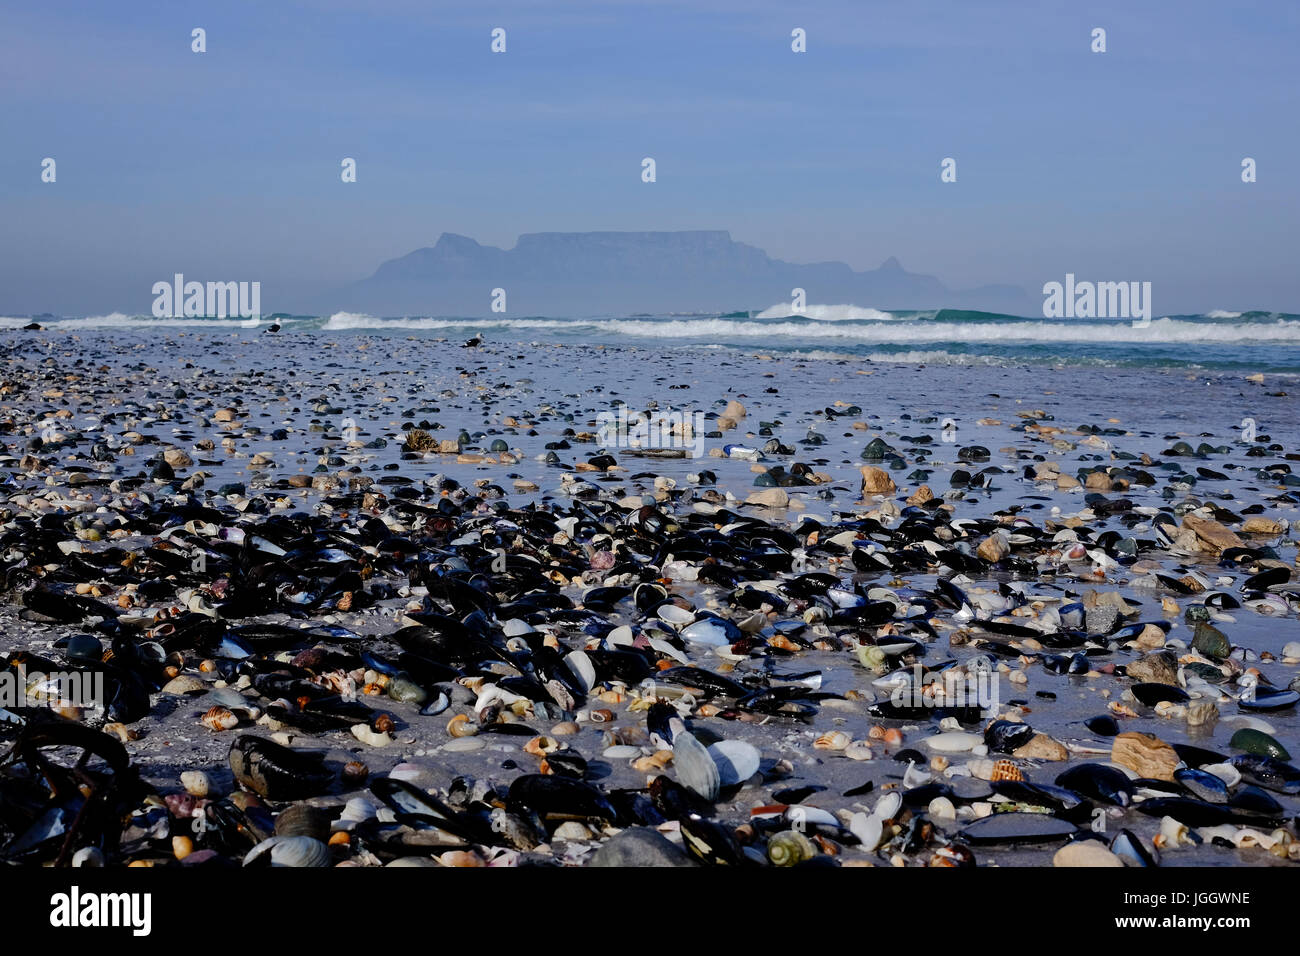 Cape Town,South Africa.  Smog covers the lower reaches of Table Mountain one of the seven natural wonders of nature. Mussel shells litter the beach. Stock Photo